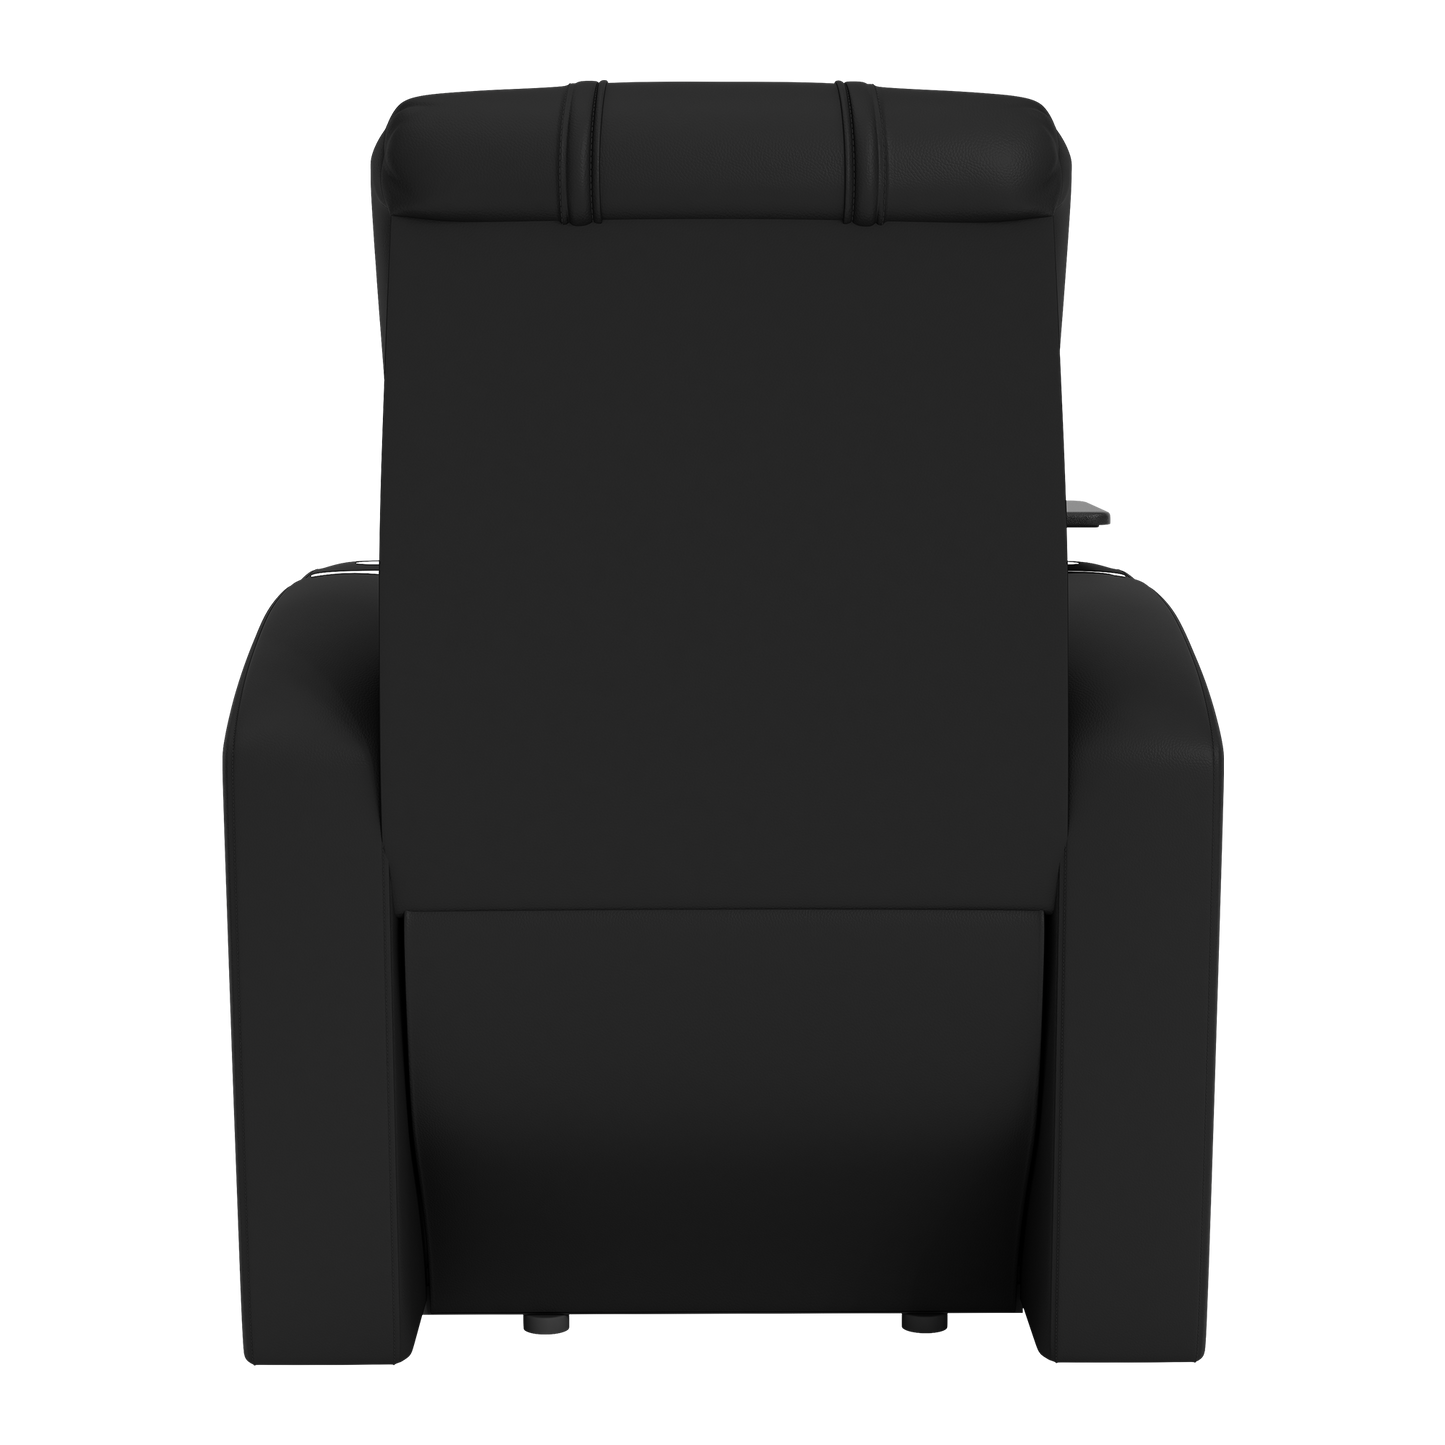 Stealth Power Plus Recliner with Brooklyn Nets Logo